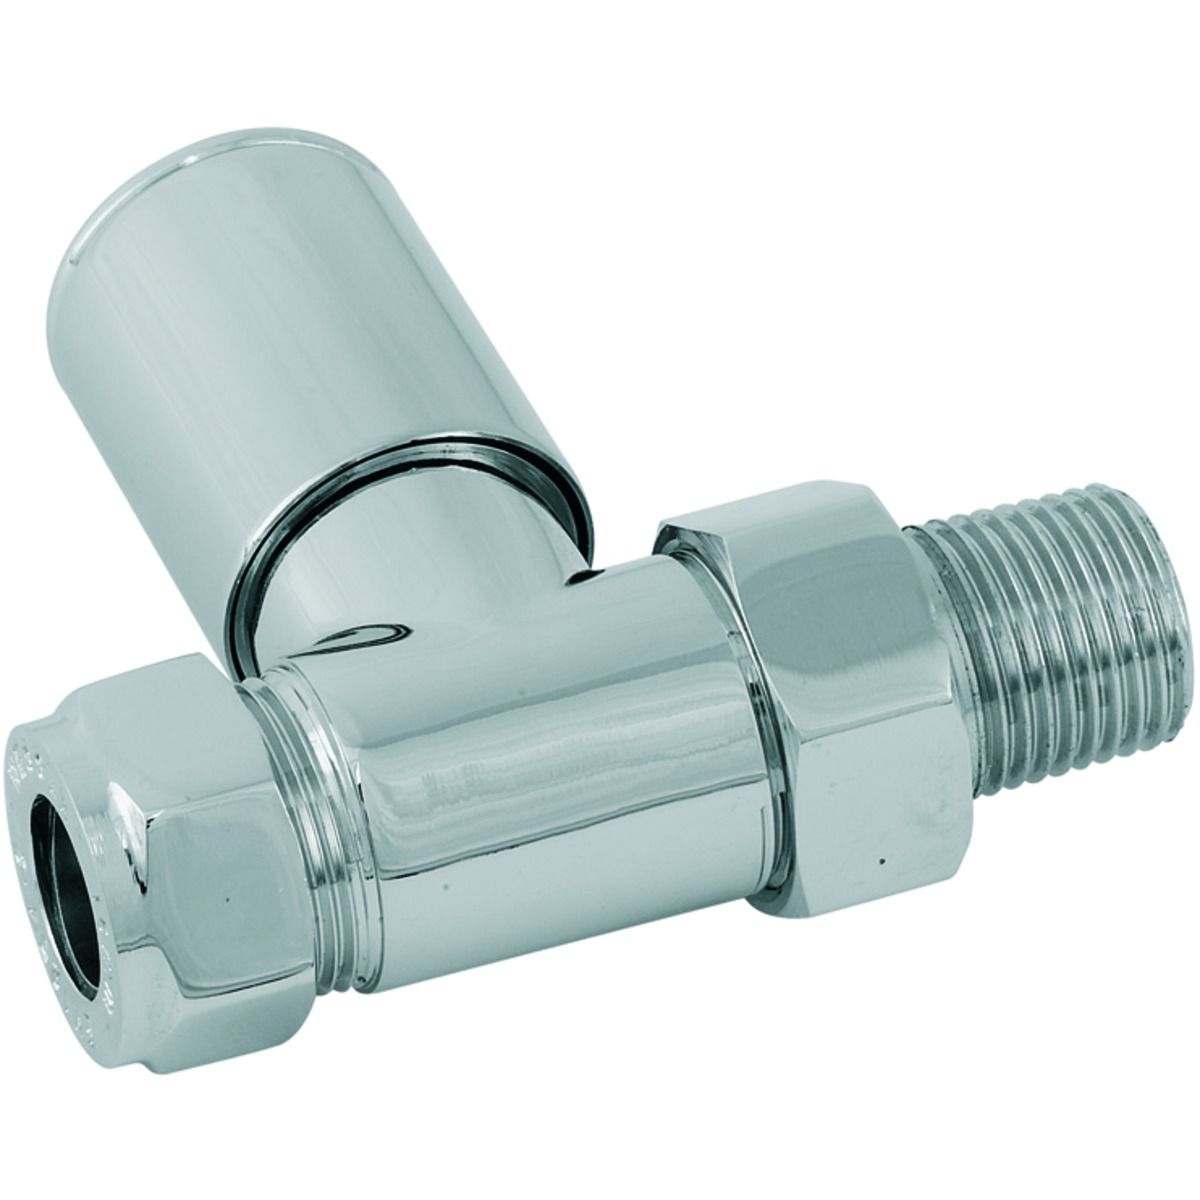 Image of Primaflow 15mm Smooth Head Straight Radiator Valve - Chrome - Pack of 2